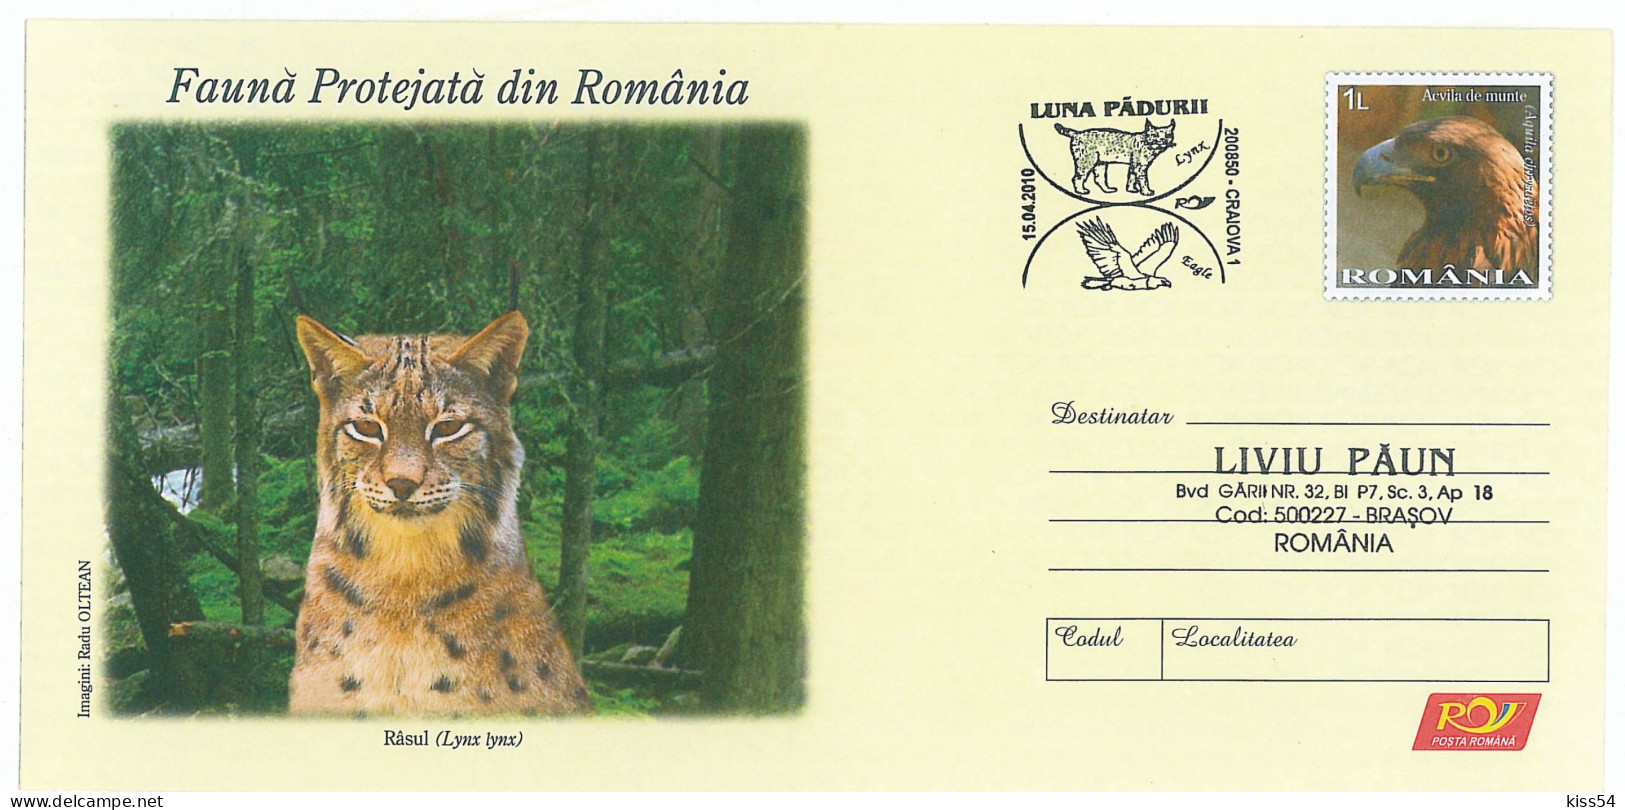 IP 2009 - 040b LYNX, Romania - Stationery, Special Cancellation - Used - 2009 - Entiers Postaux